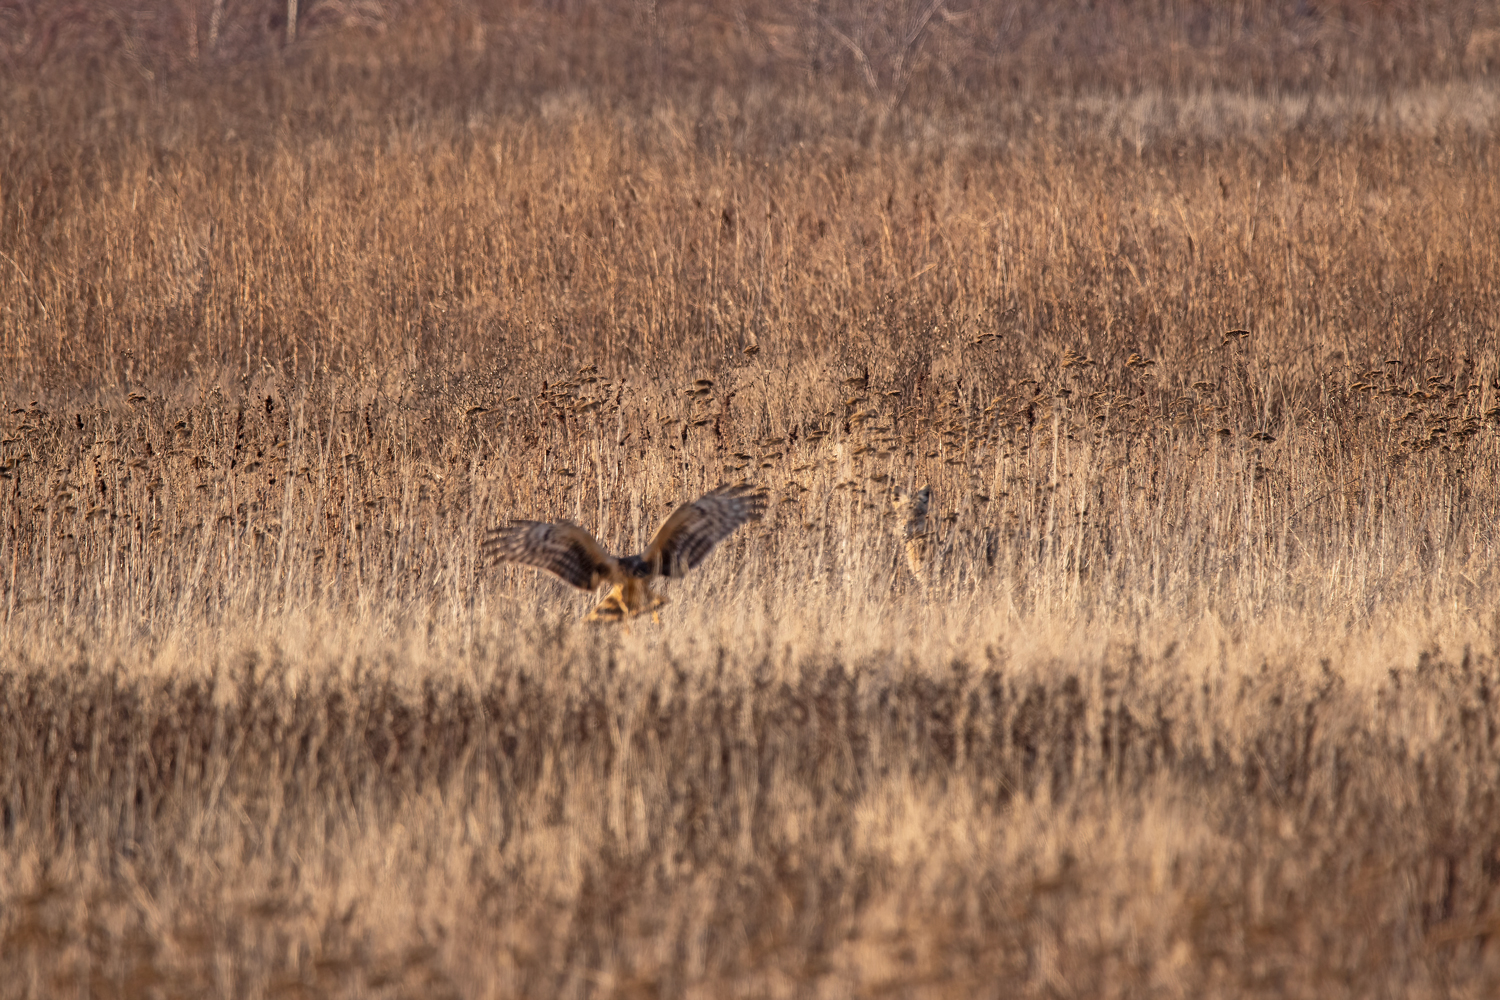 Northern Harrier lands in front of a Coyote